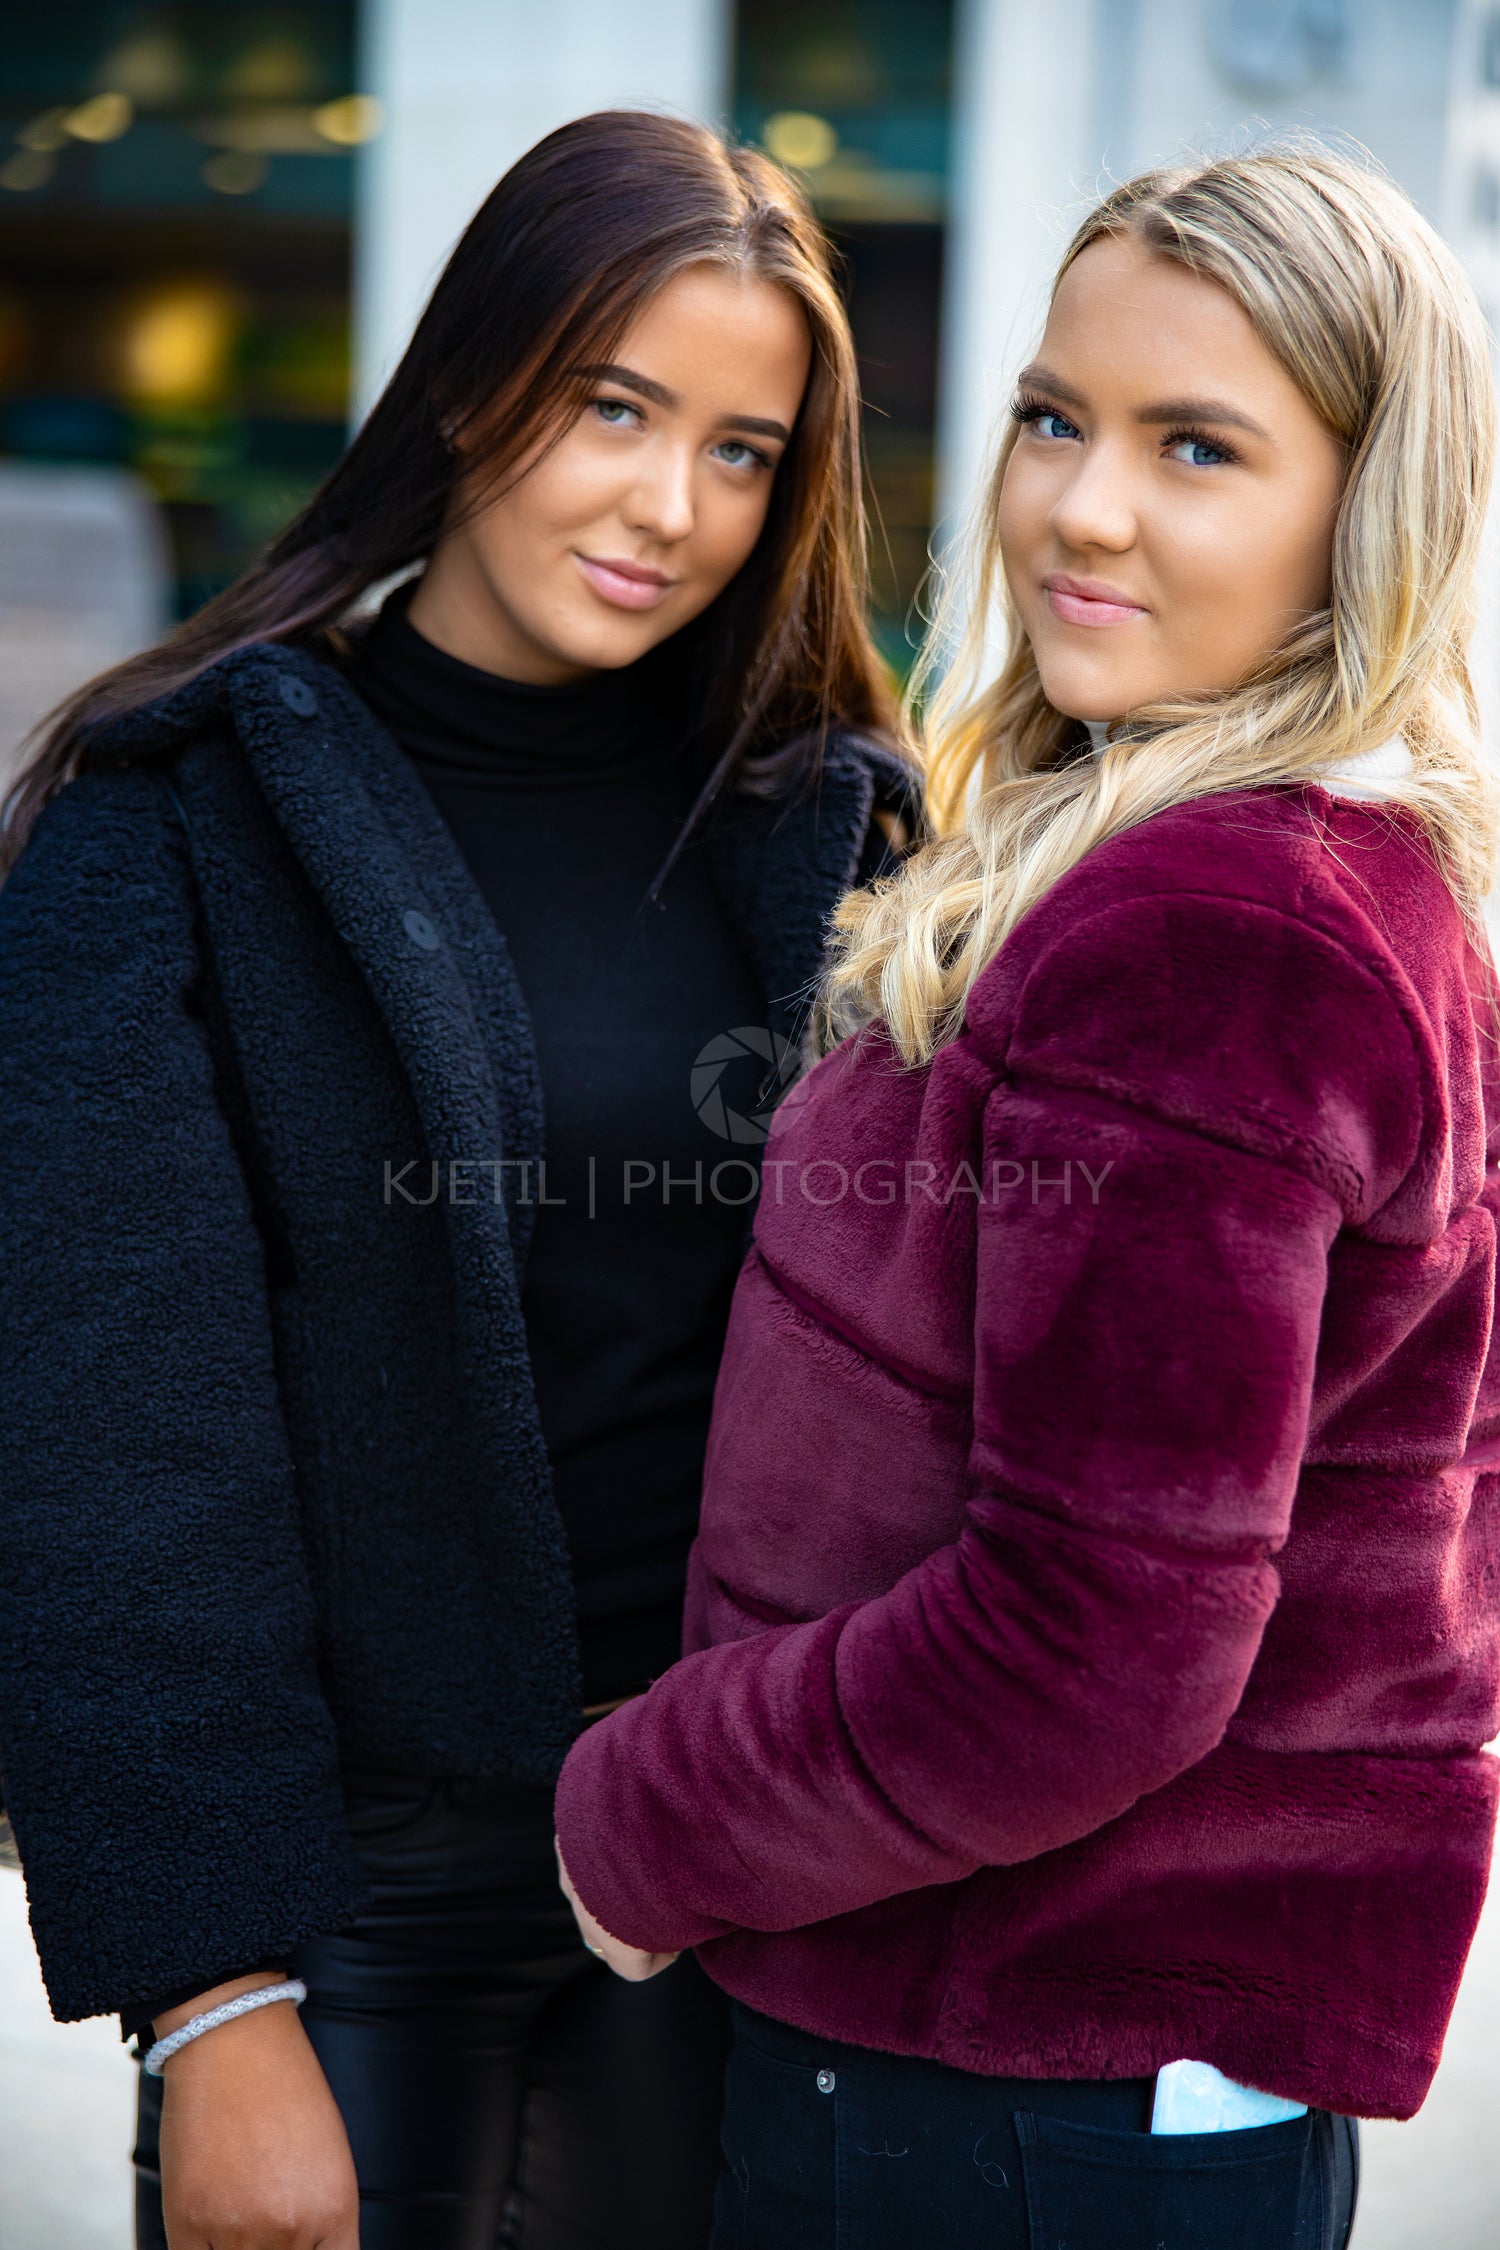 Close Portrait Of Two Smiling Beautiful Young Women Friends In City